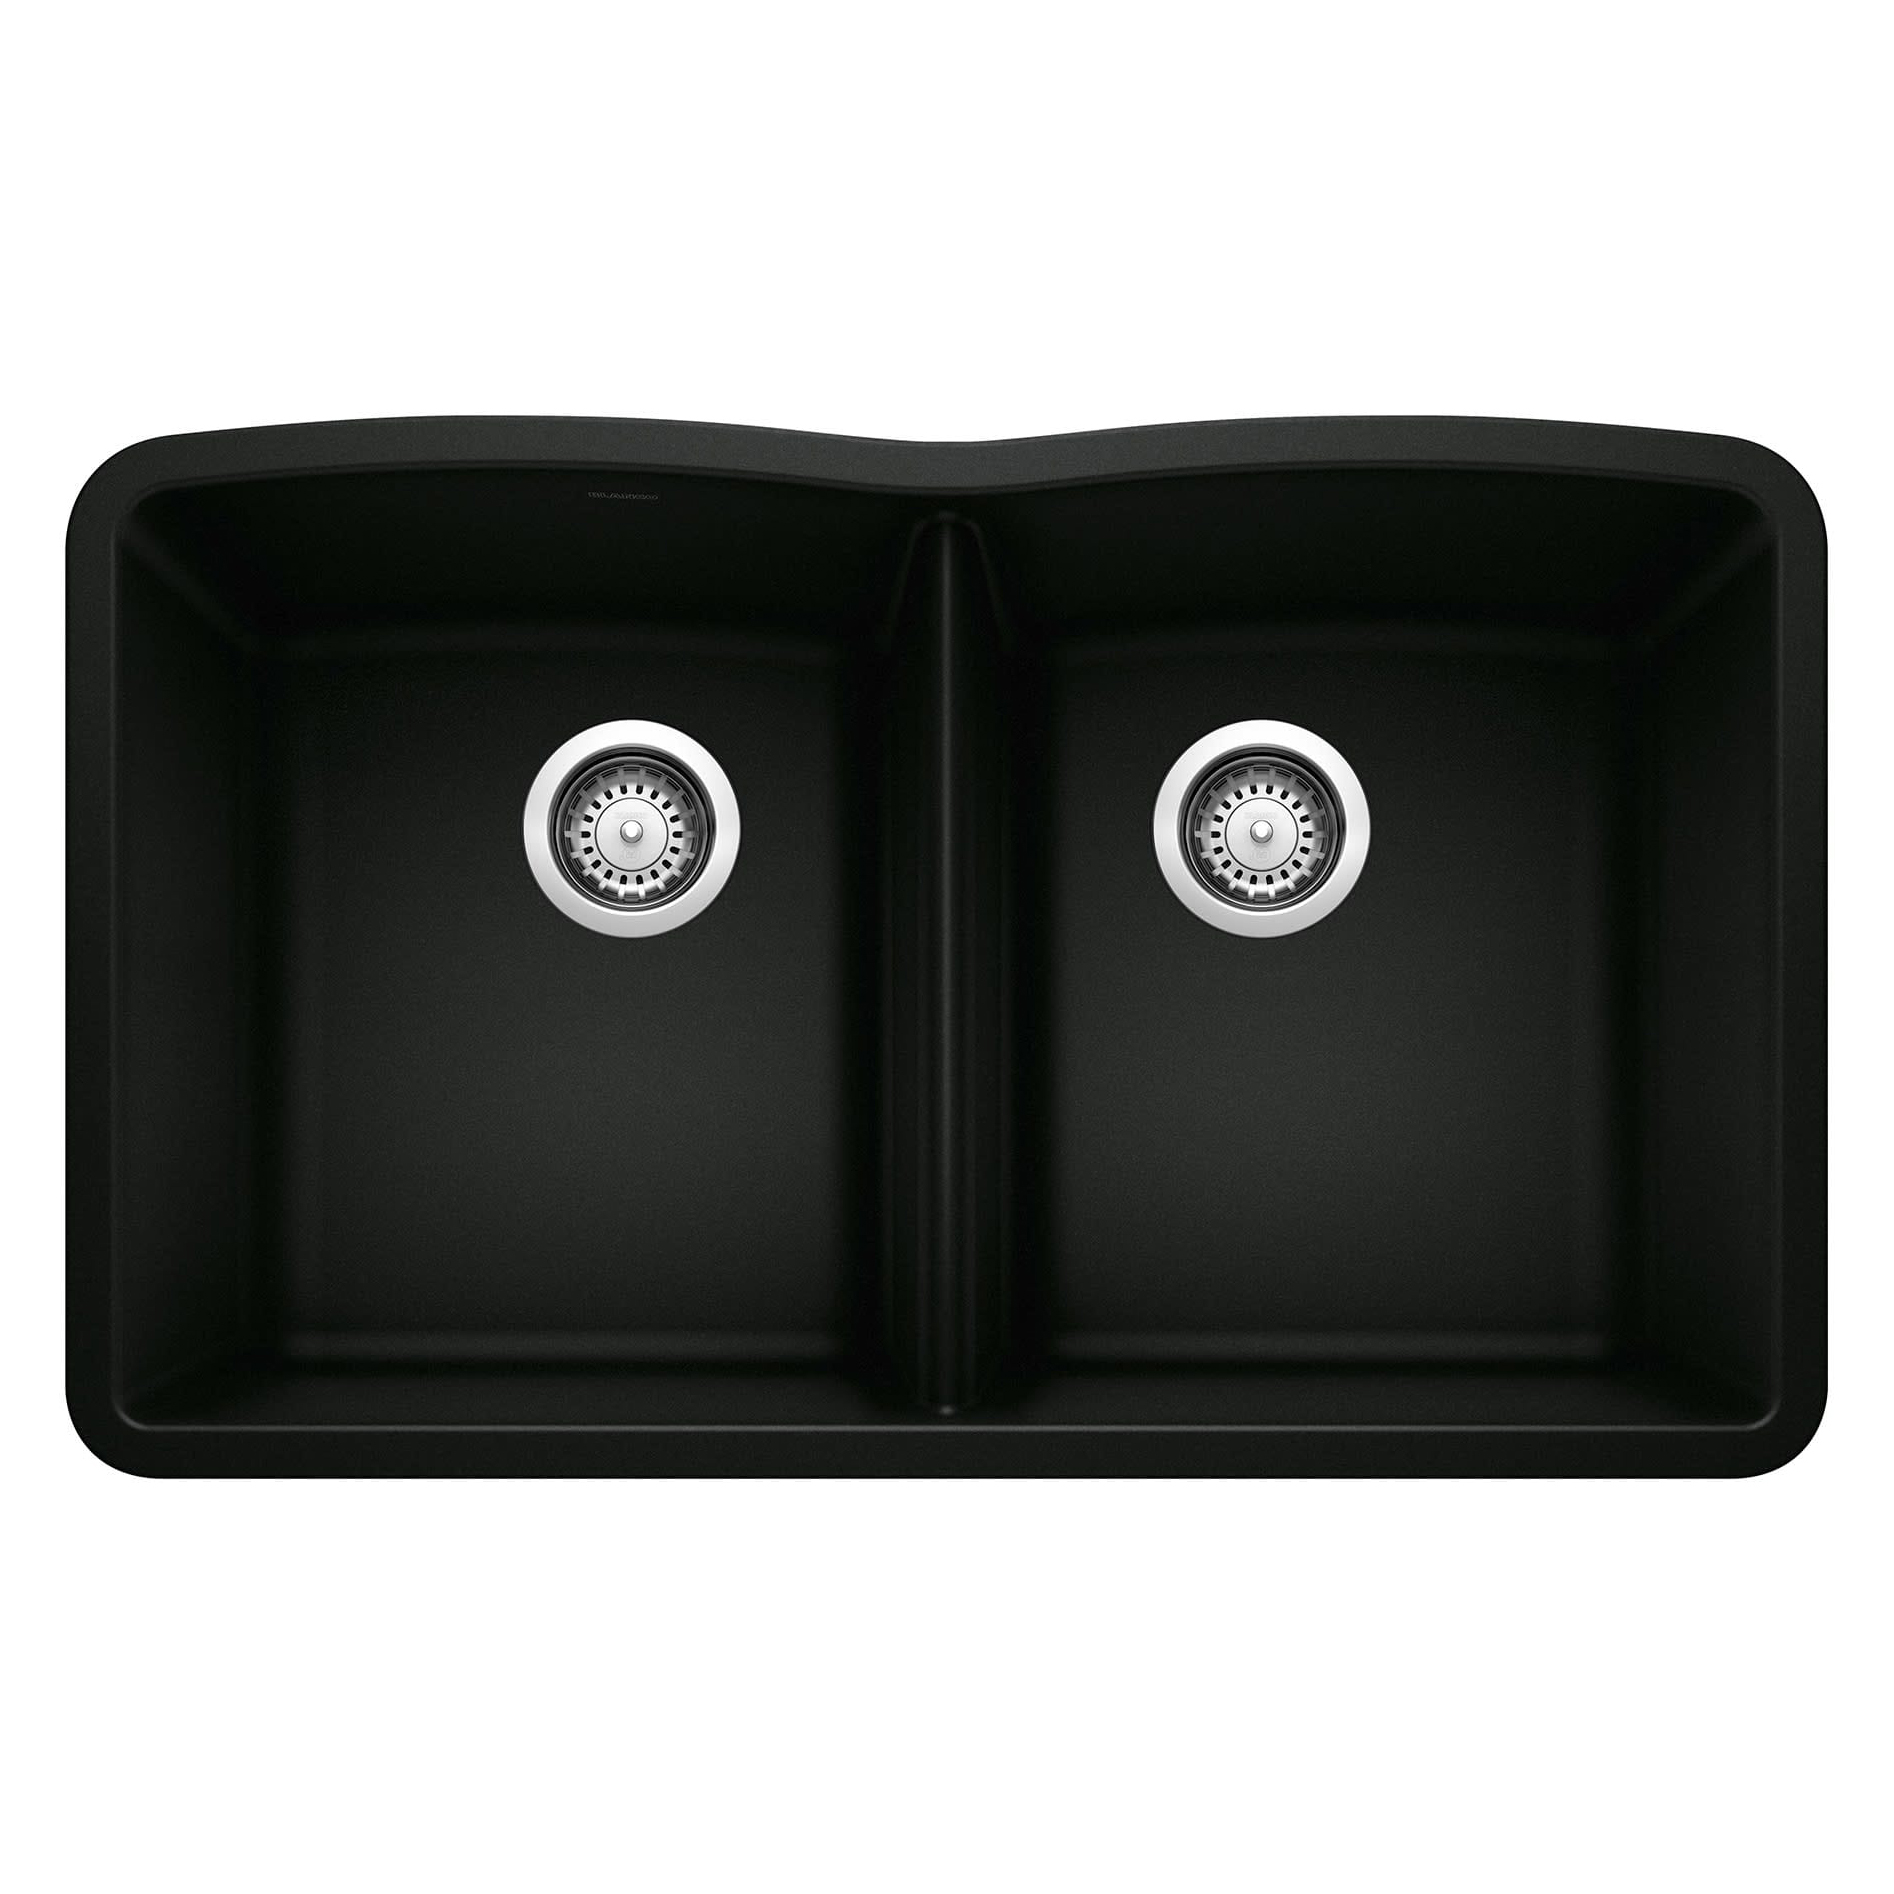 Diamond 32x19-1/4x-1/2" Equal Double Bowl Sink in Black